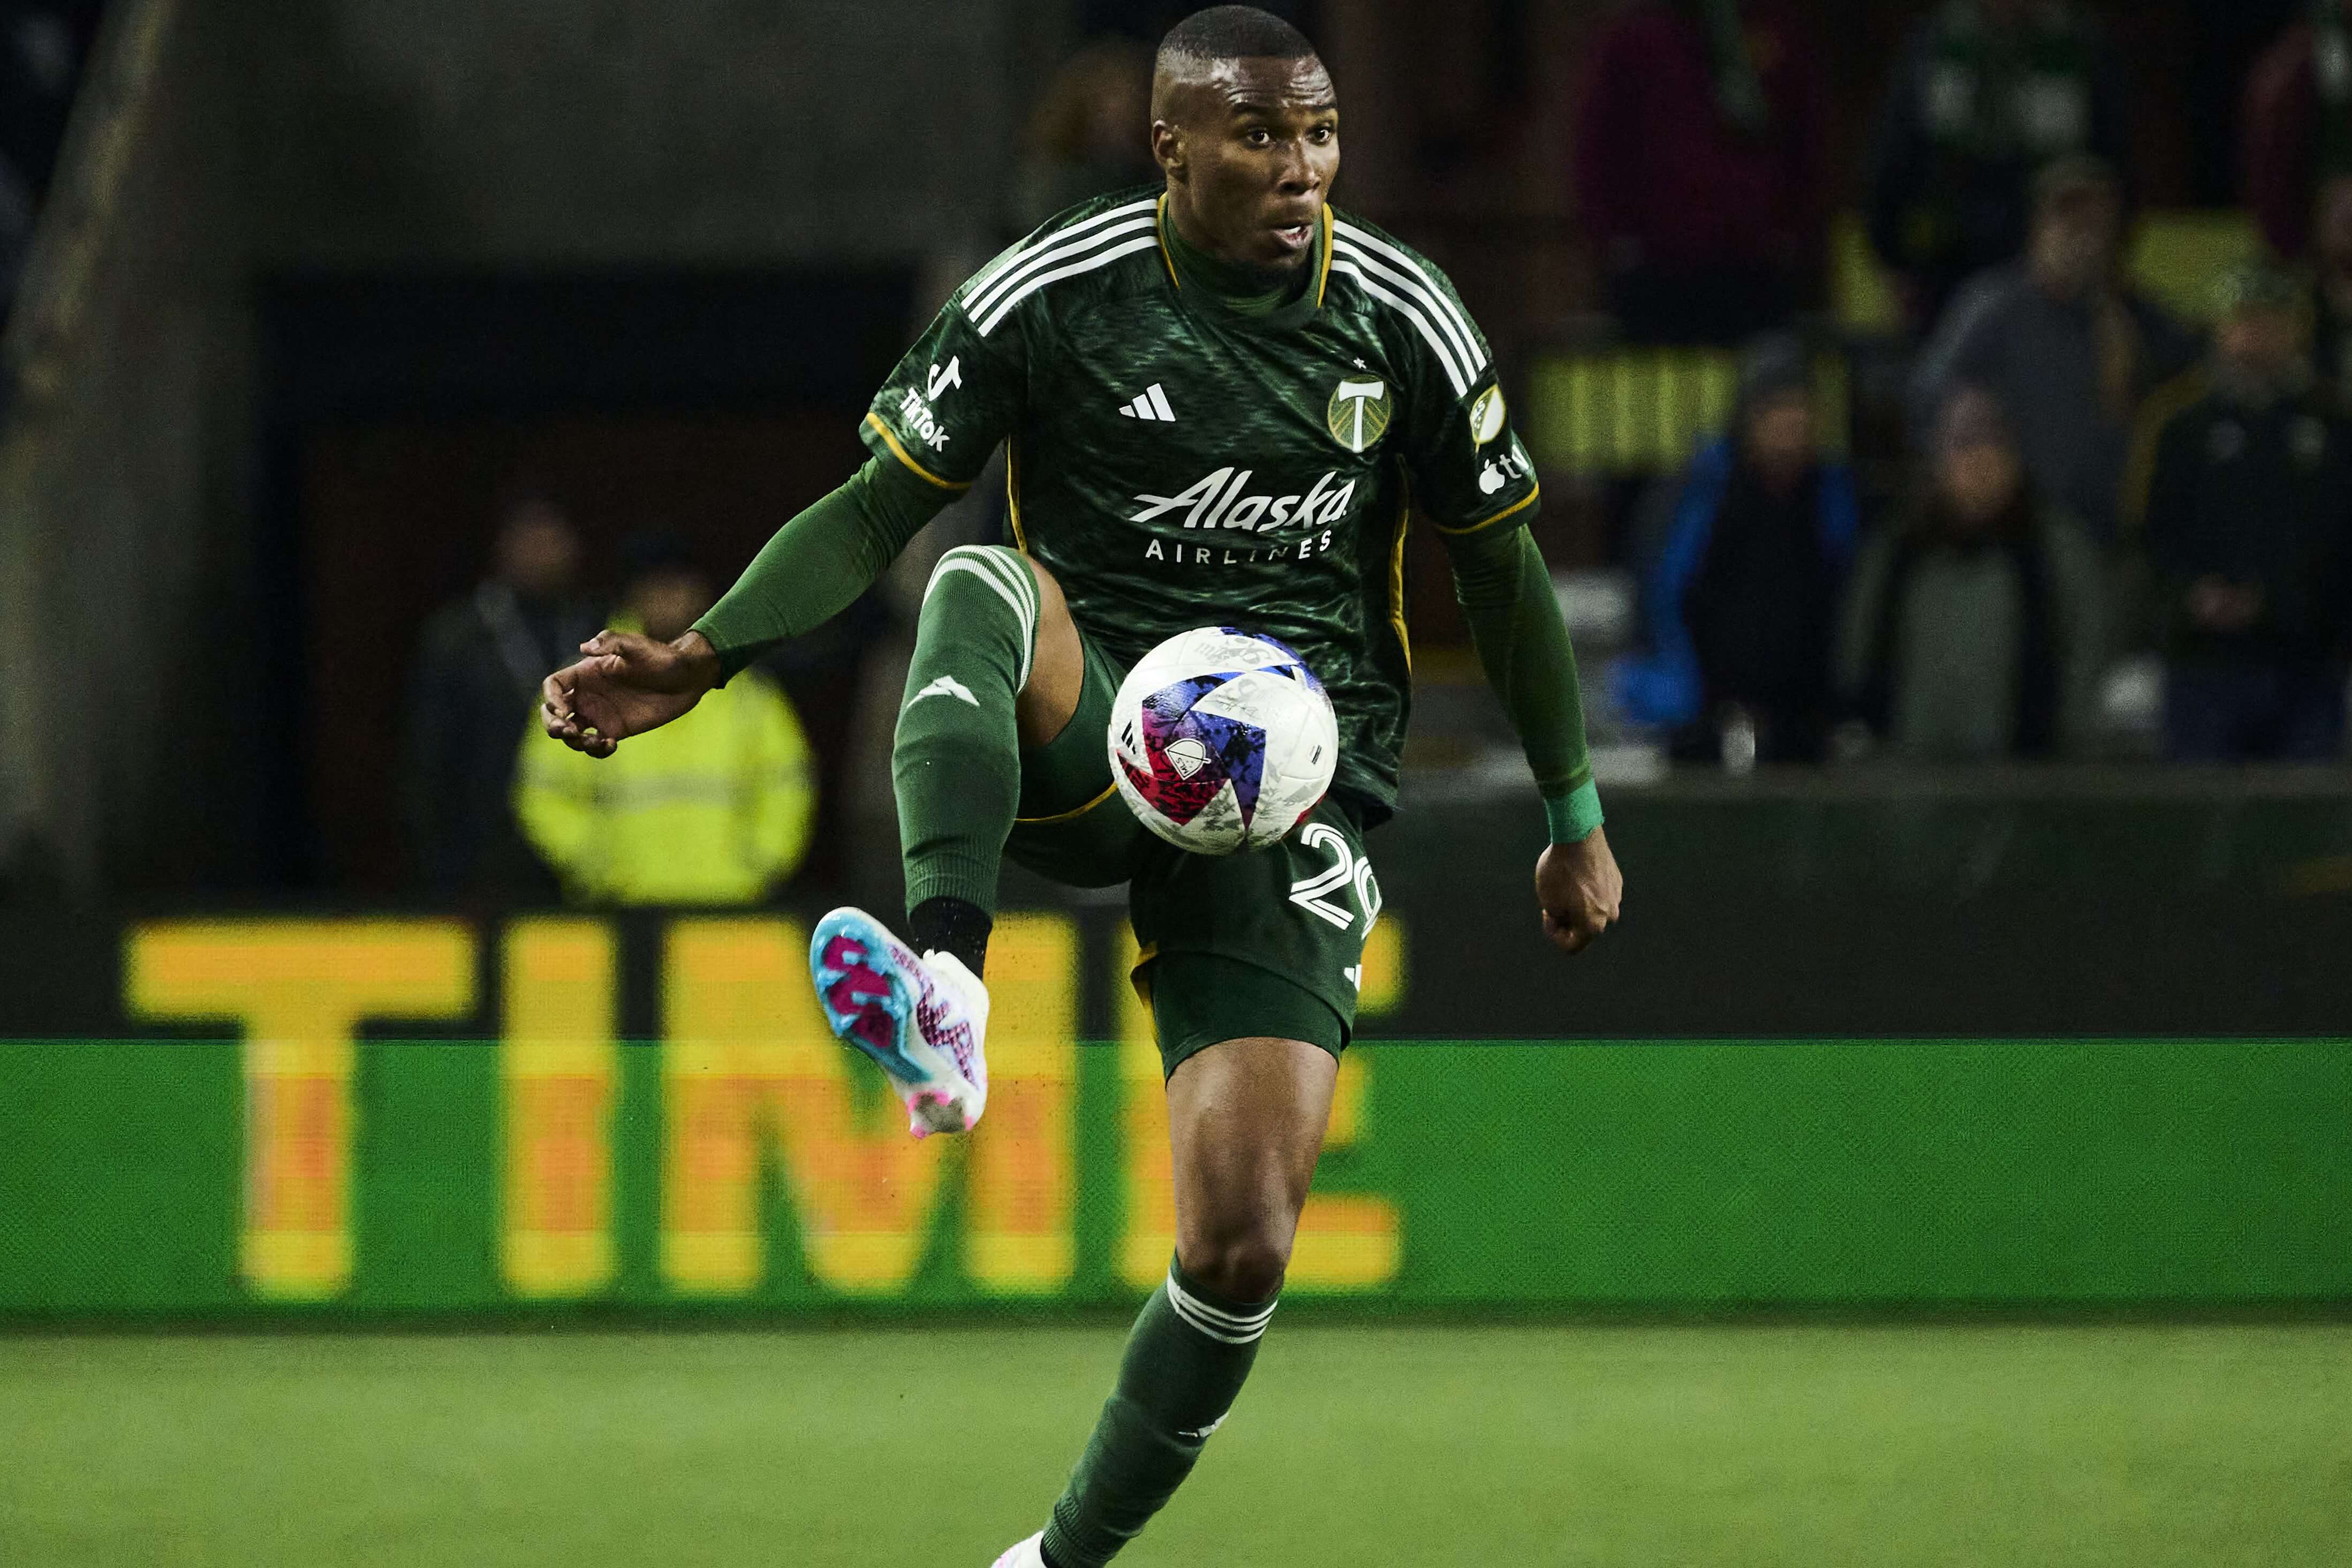 How To Bet - Portland Timbers vs LA Galaxy Picks and Predictions: Goals Come at Fast and Furious Pace